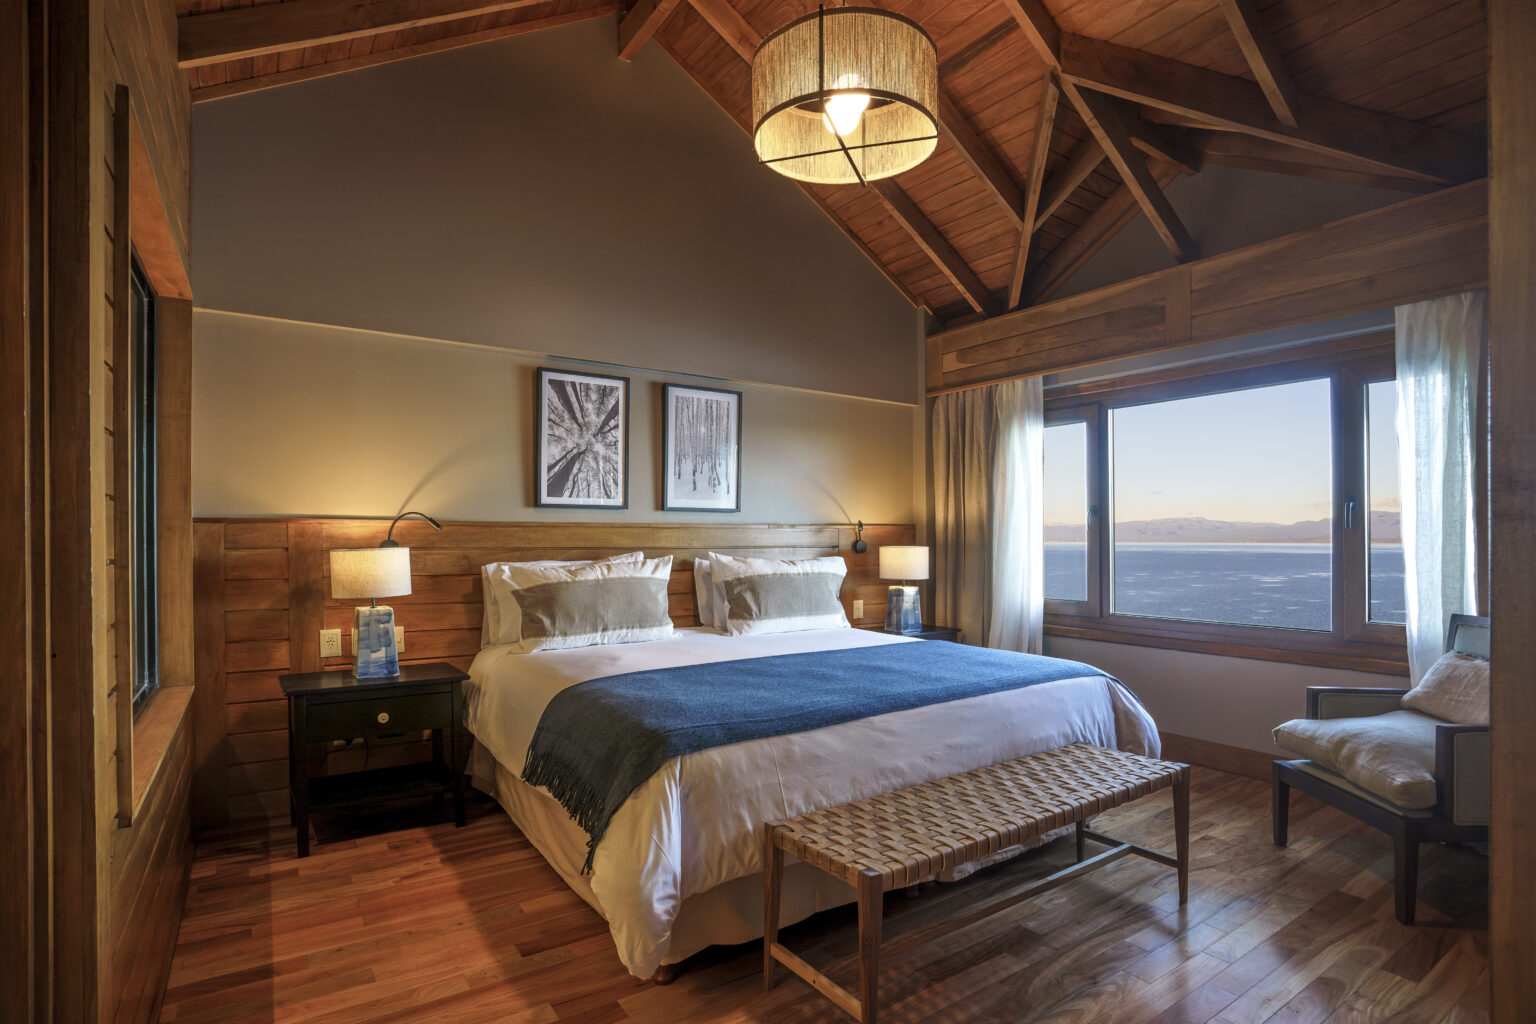 Hotel room with bed and window overlooking water and mountains